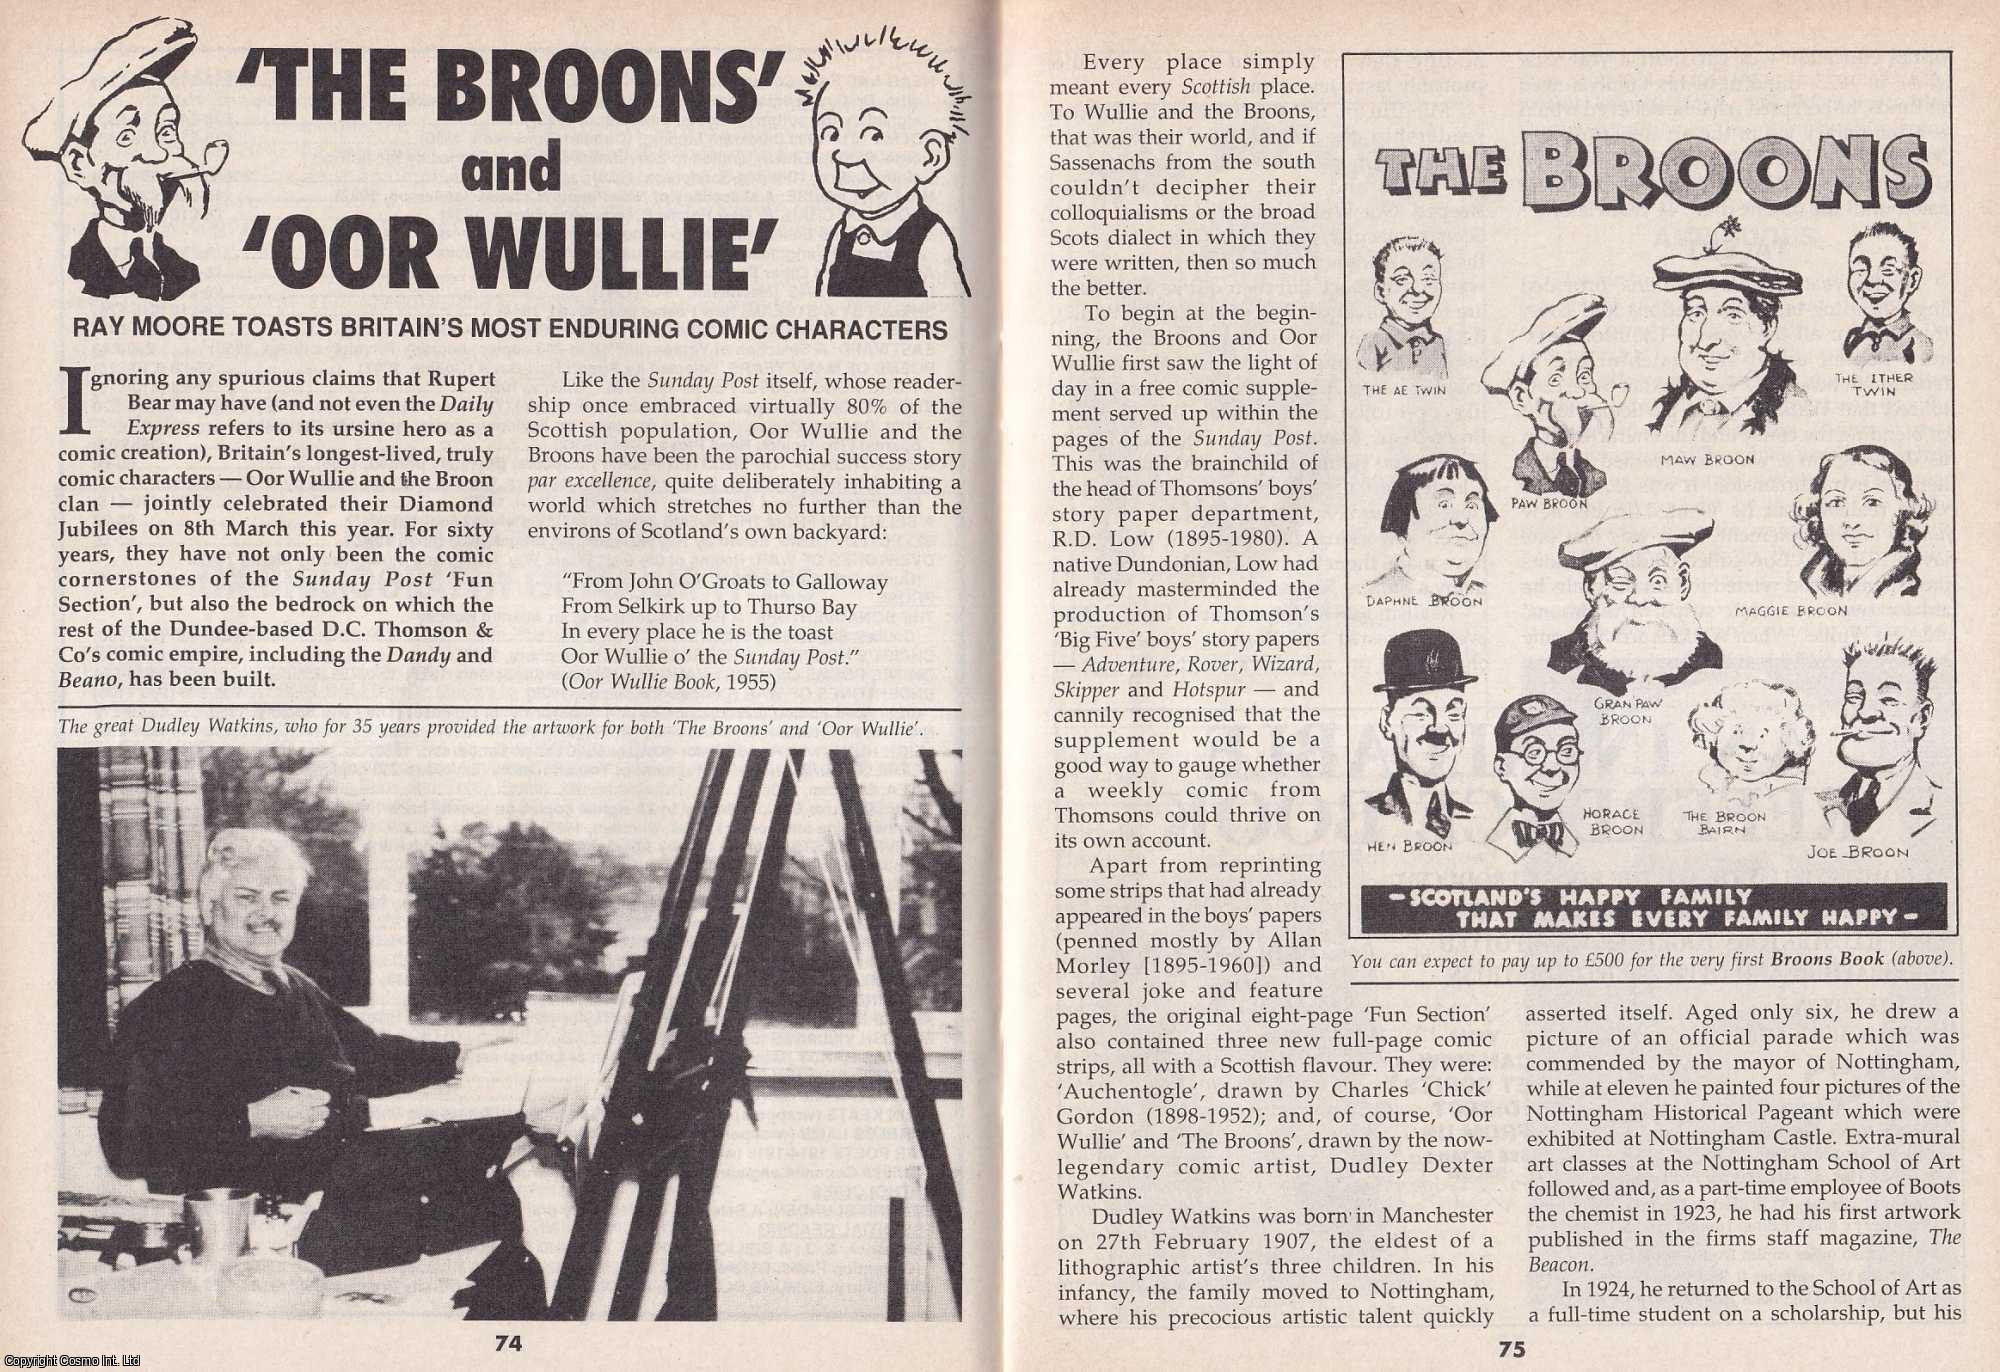 Ray Moore - The Broons & Oor Wullie. This is an original article separated from an issue of The Book & Magazine Collector publication.